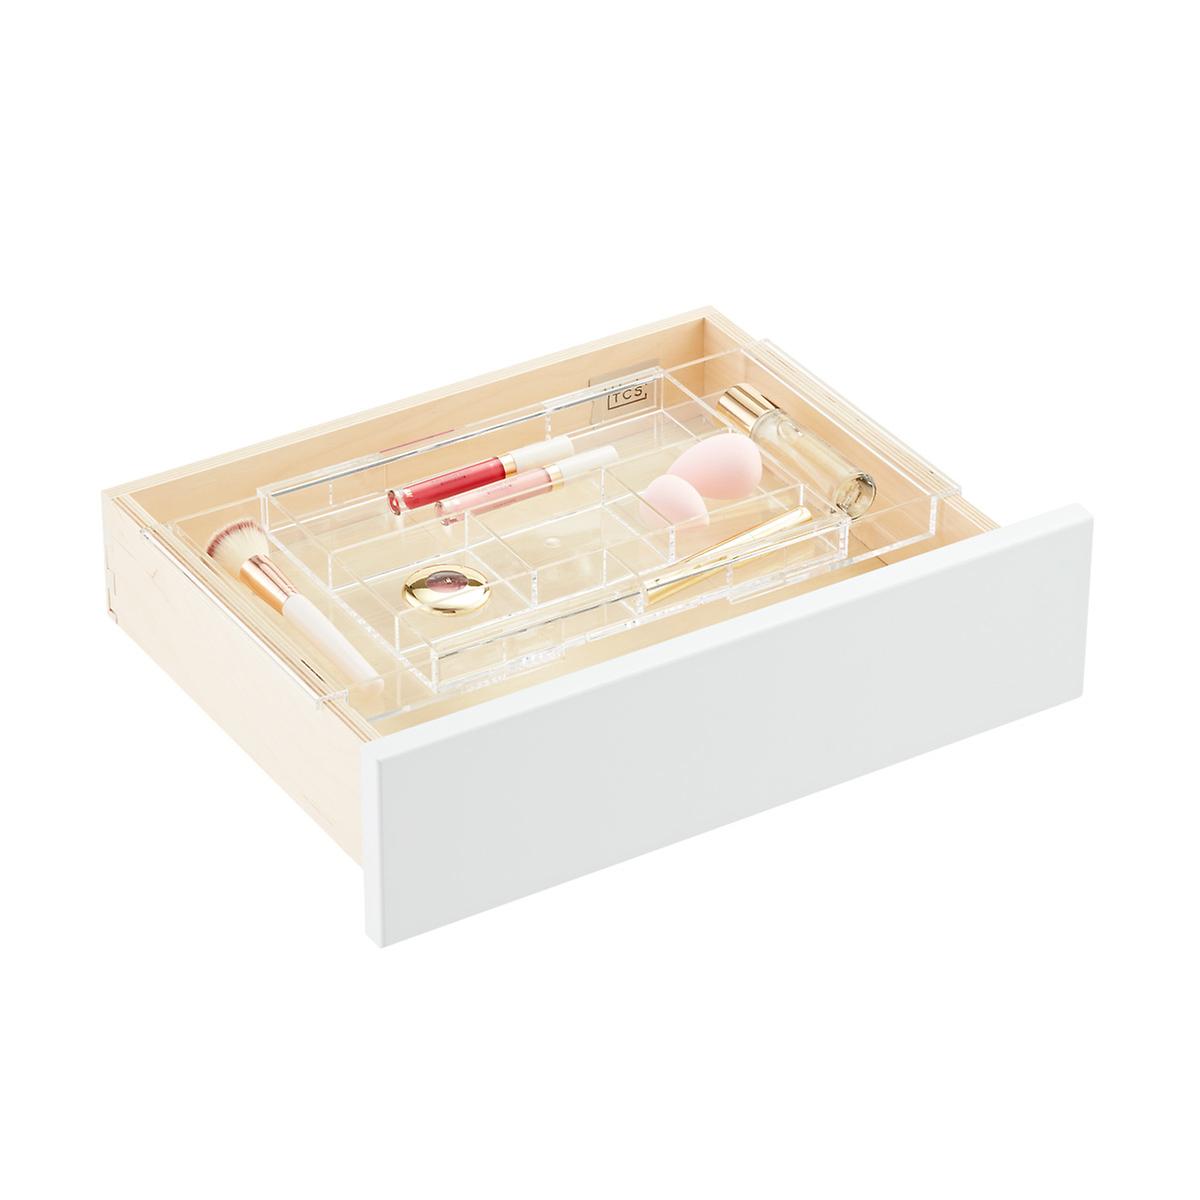 Expanding Acrylic Drawer Organizer | The Container Store